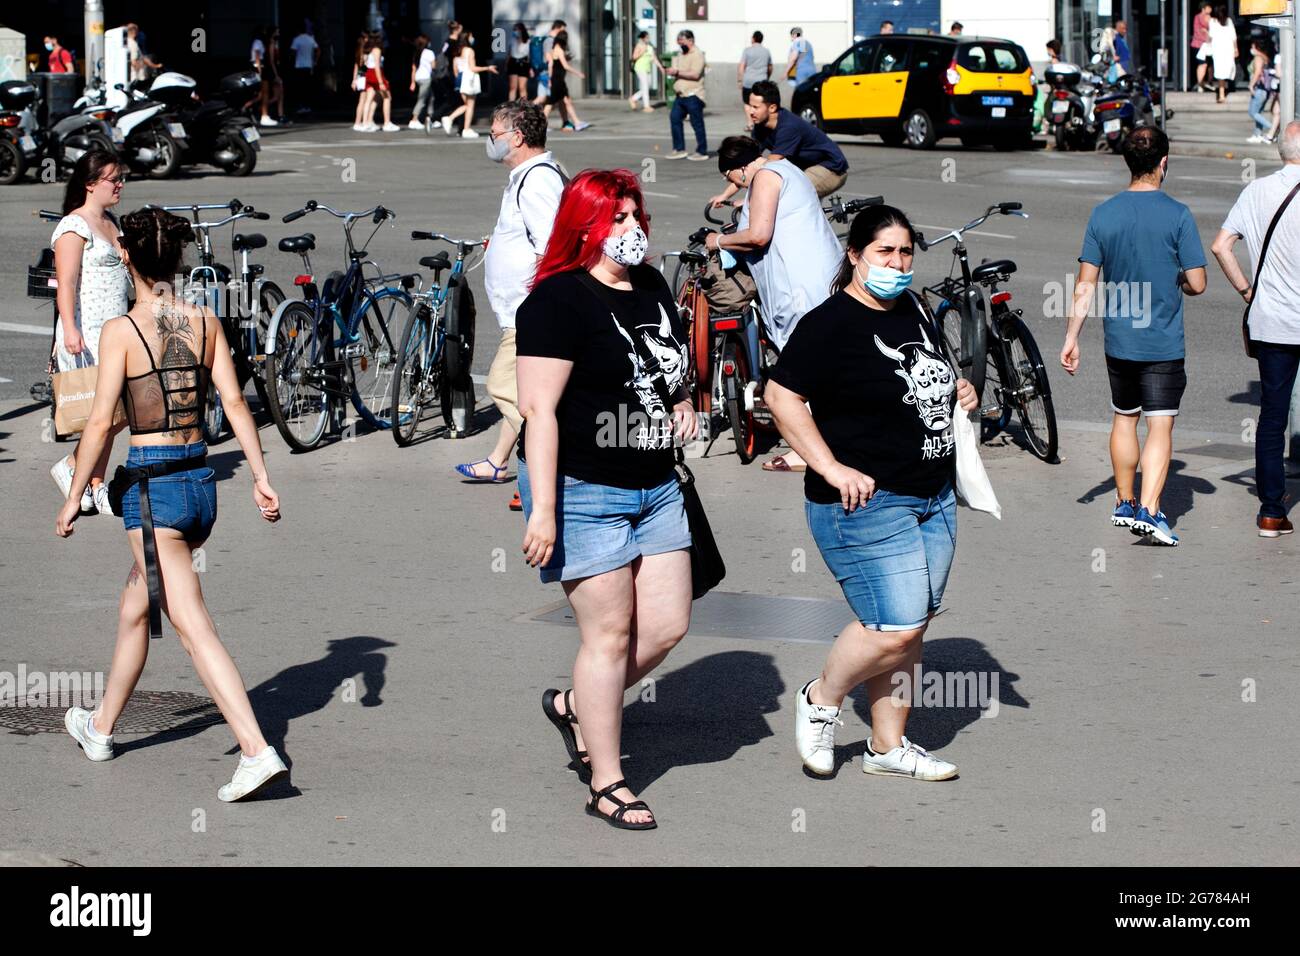 Two large woman wearing identical t-shirts, Barcelona, Spain. Stock Photo